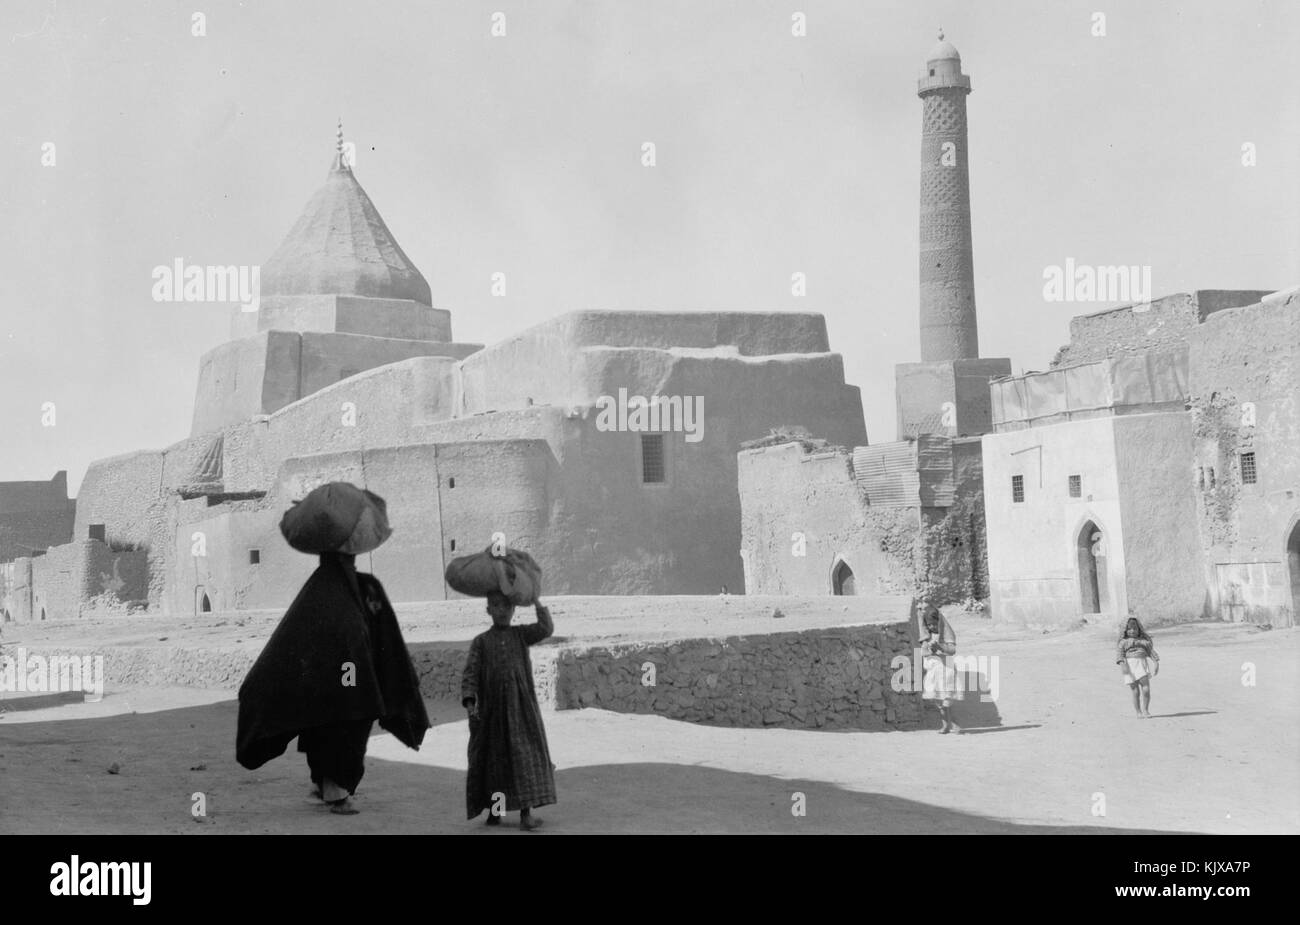 Ancient Mosul, a Yezidi shrine to the left and the Nouri Mosque minaret to the right Stock Photo